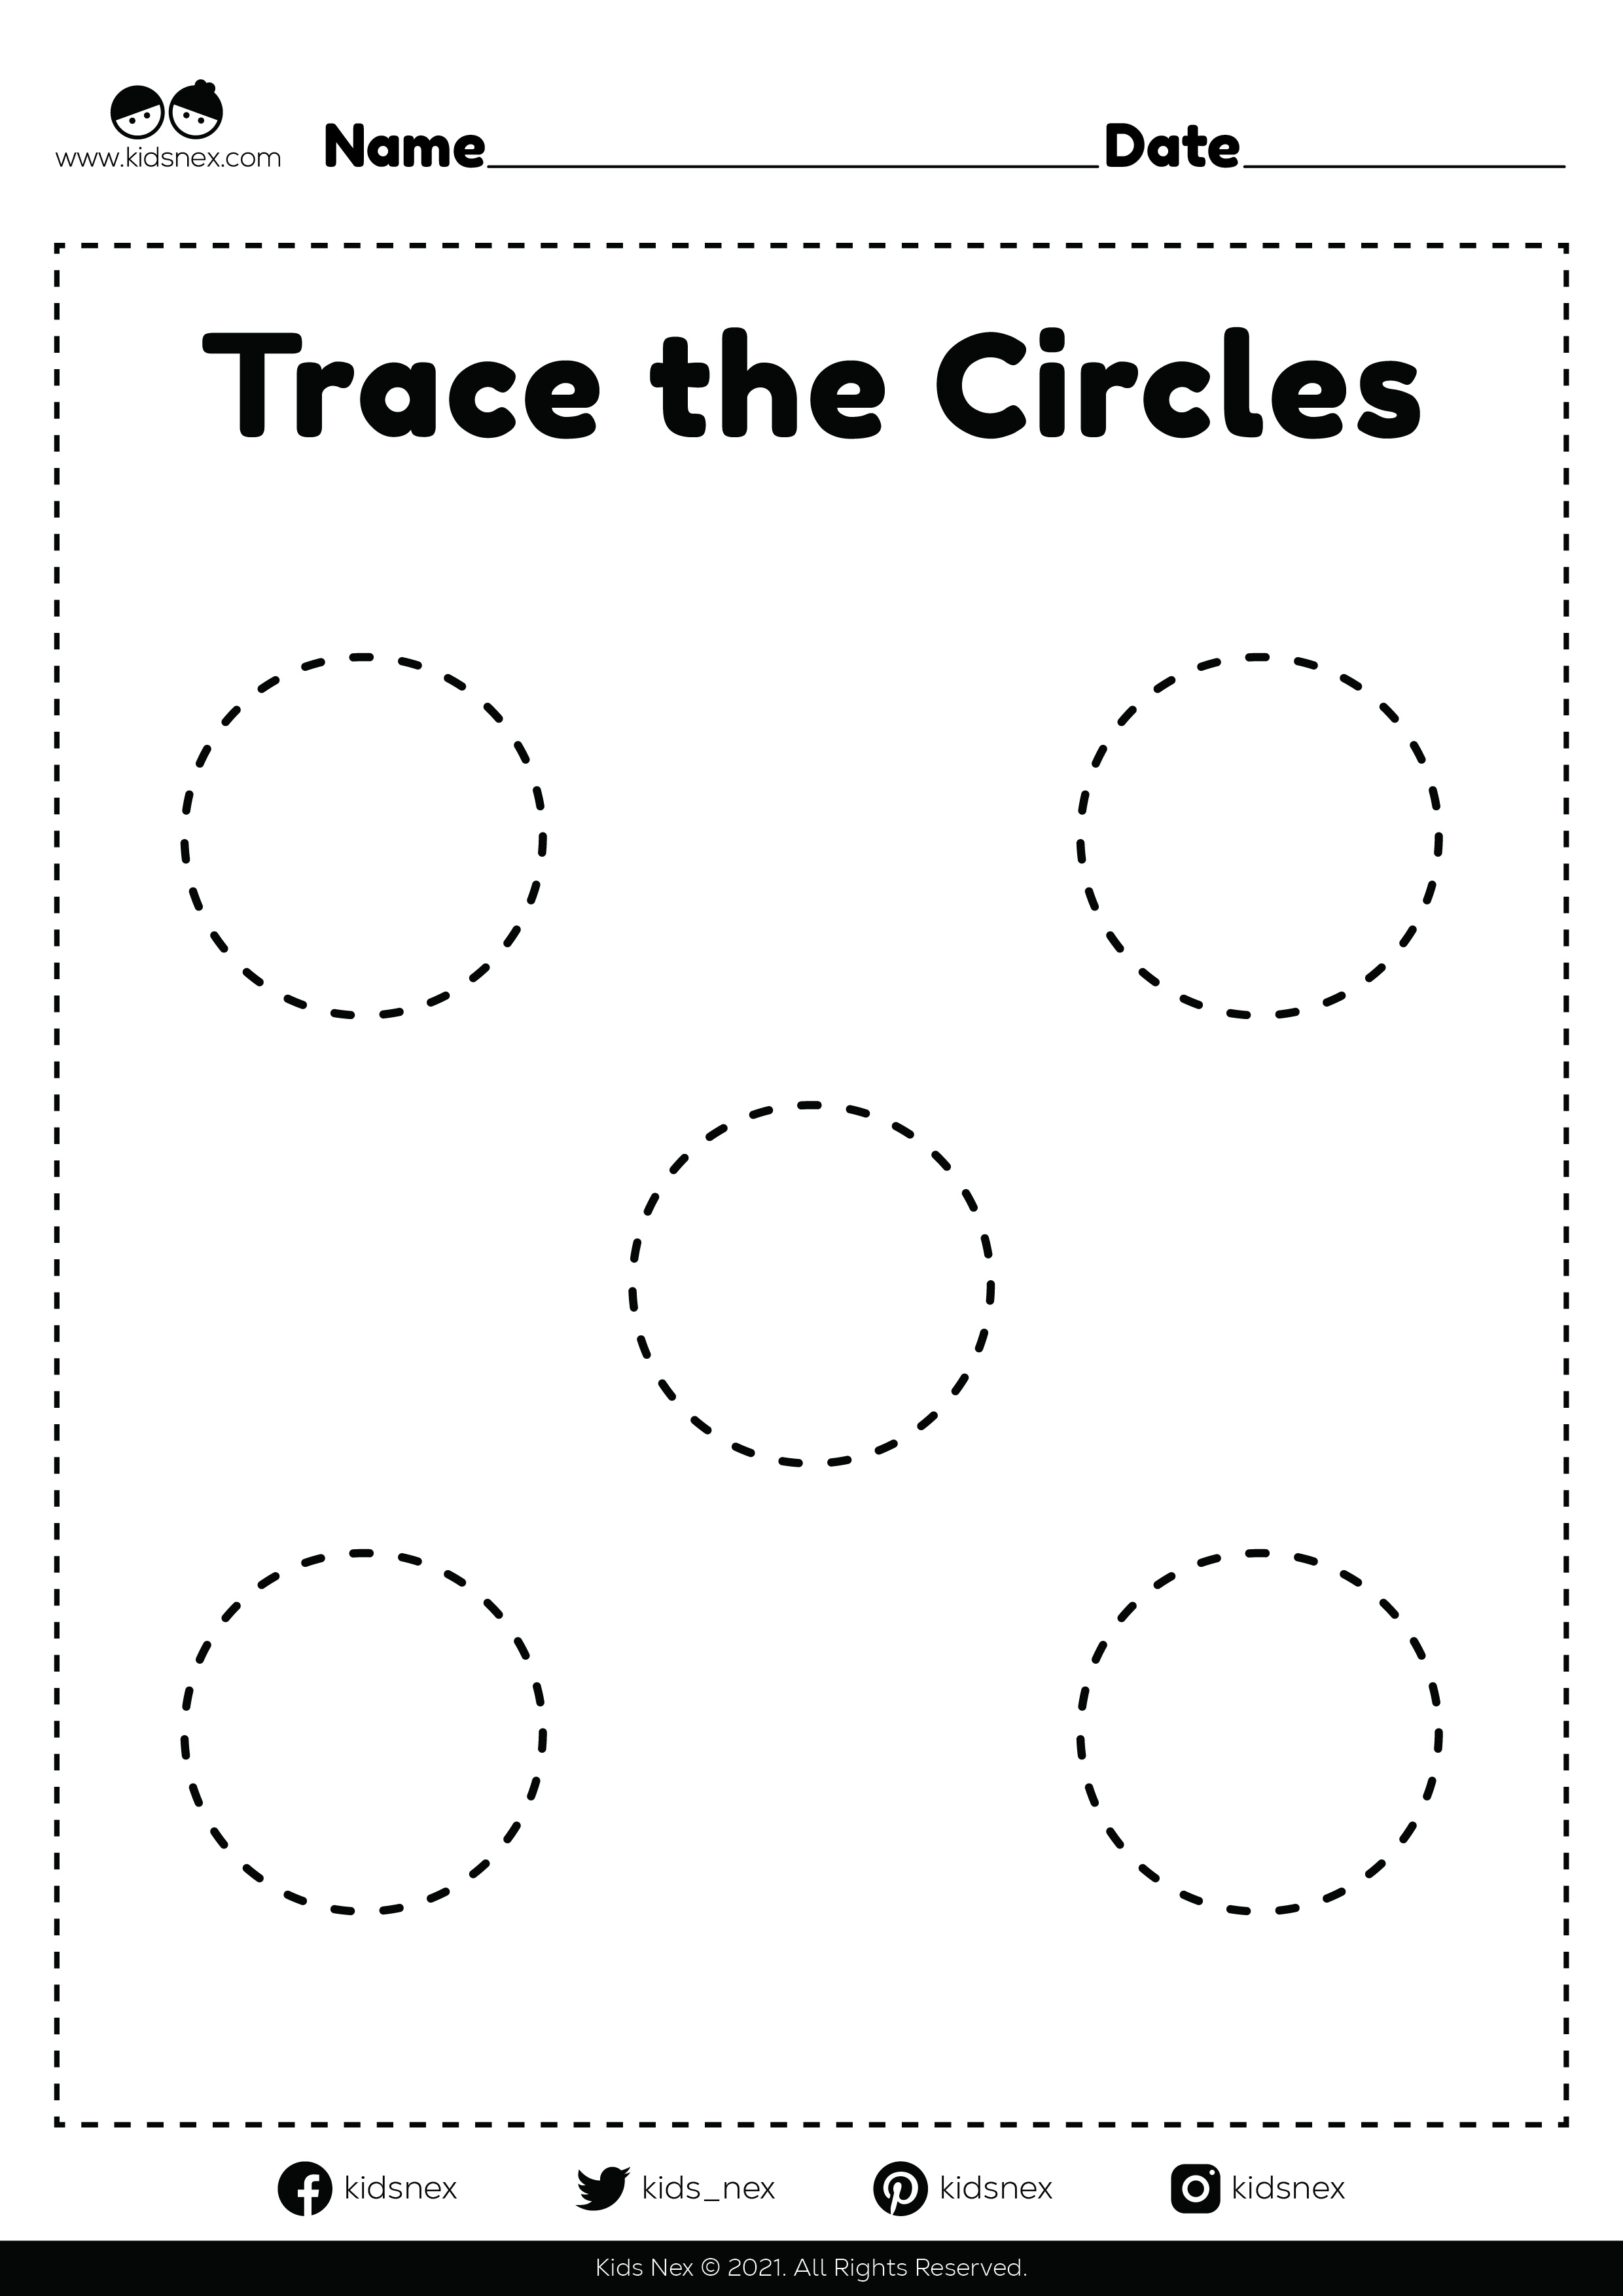 Tracing circles worksheet for kindergarten and preschoolers kids free printable sheet for fun educational activities to learn.